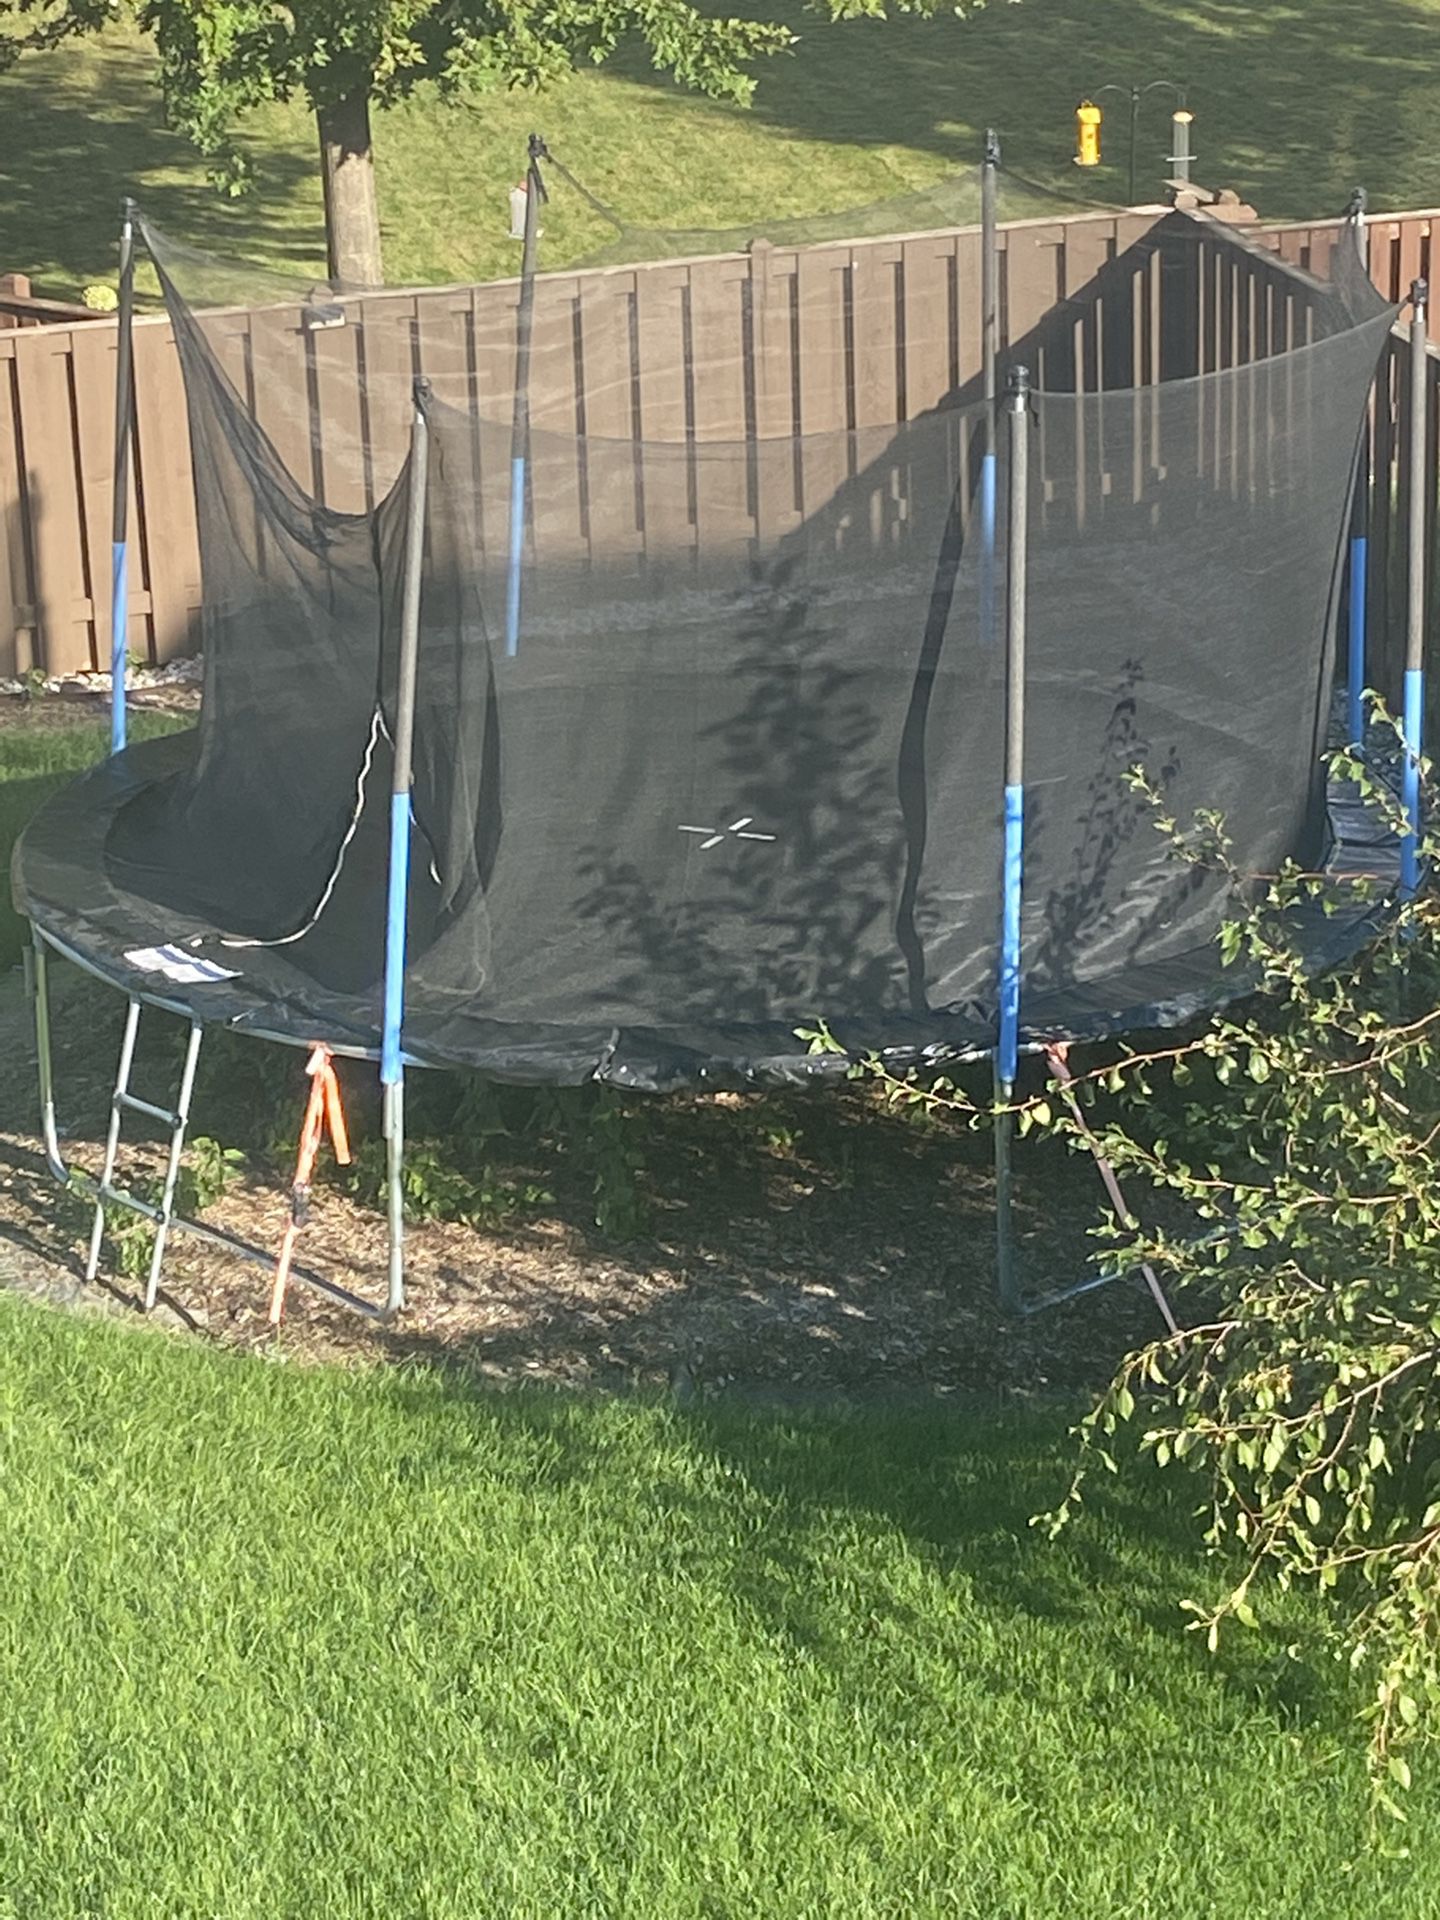 Free 14 Ft Trampoline  Must Be Gone By Friday  Must Disassemble 